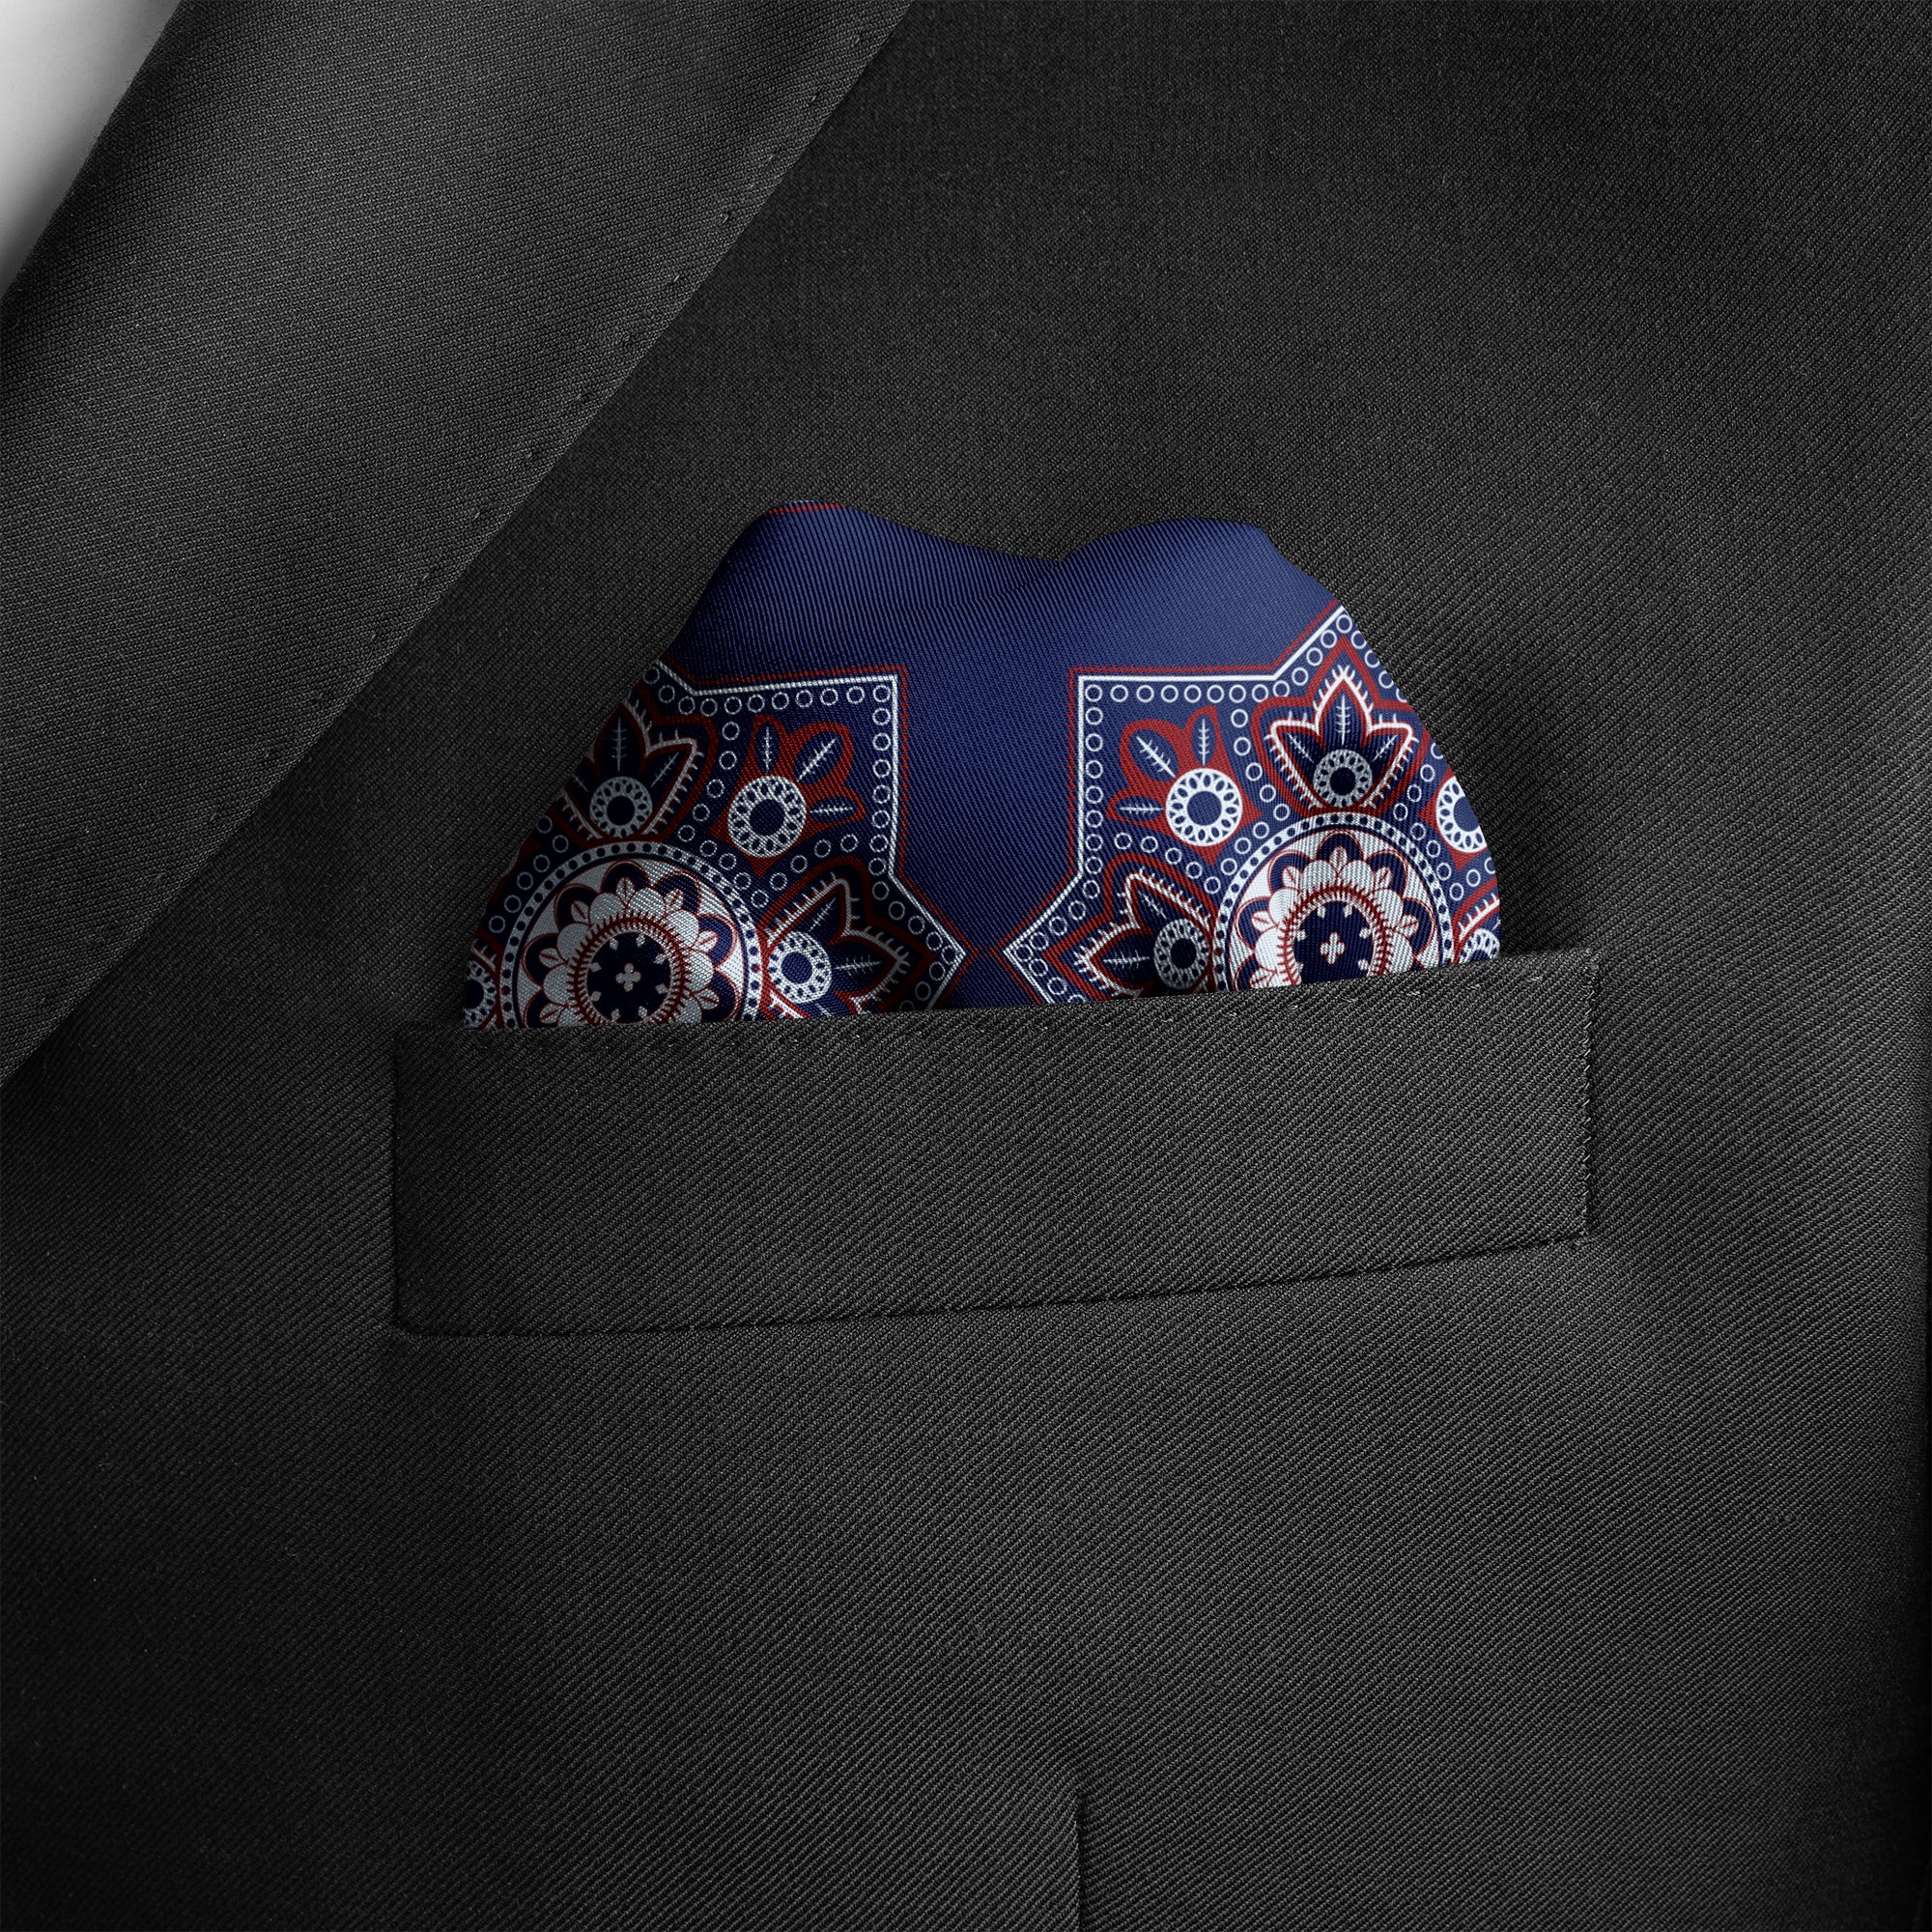 IMPERIAL AJRAK SILK POCKET SQUARE (LUXE COLLECTION)